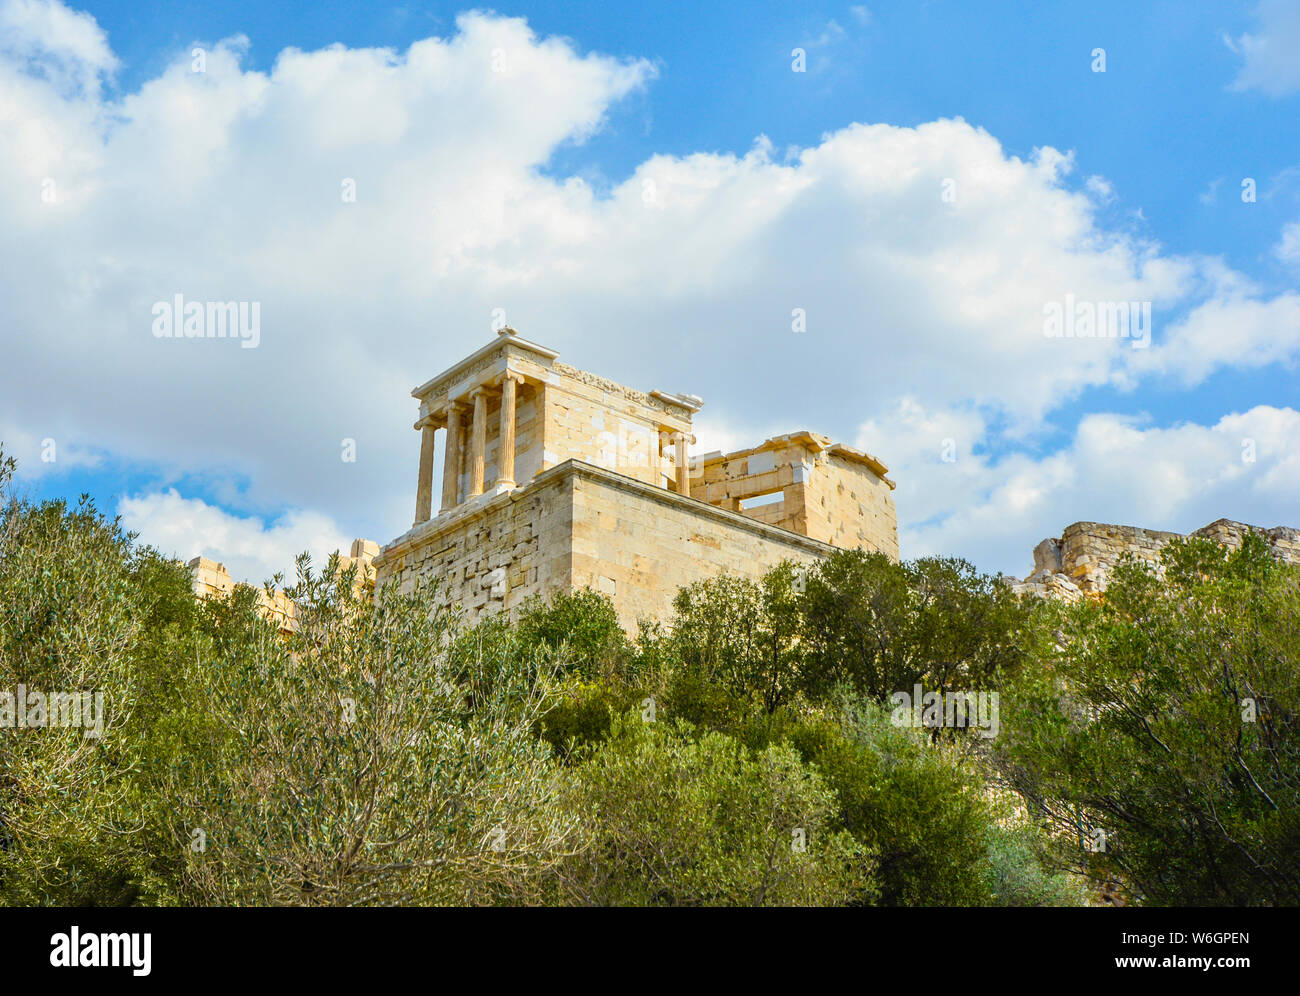 A well preserved area of the Parthenon on Acropolis Hill rises above the brush and trees in ancient Athens Greece. Stock Photo